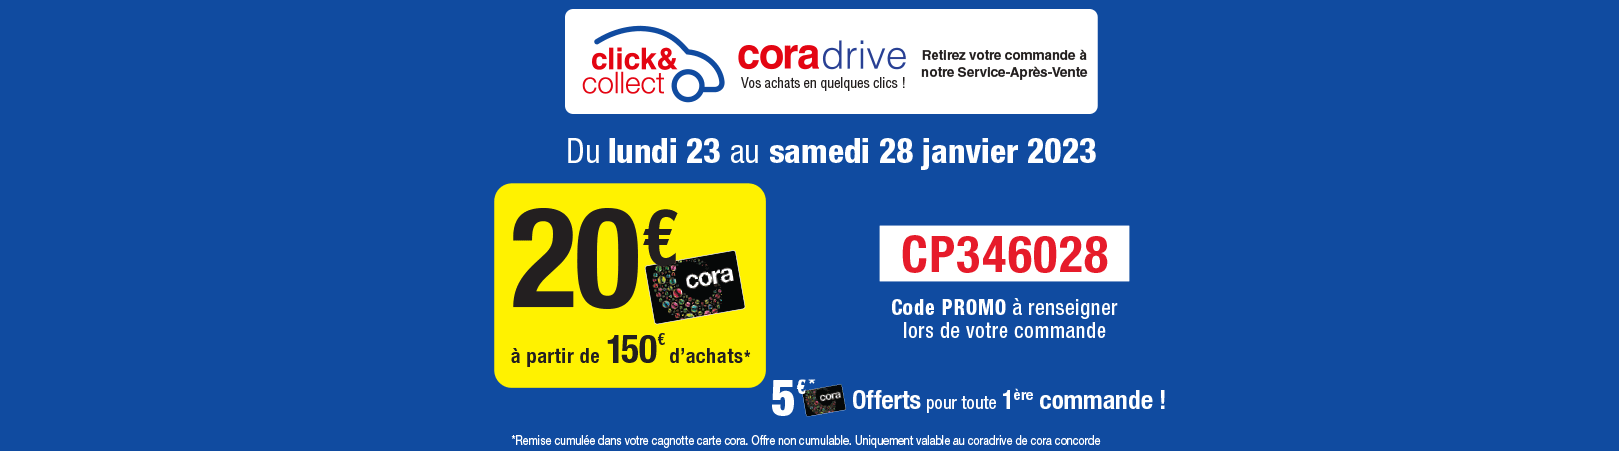 Offre coradrive